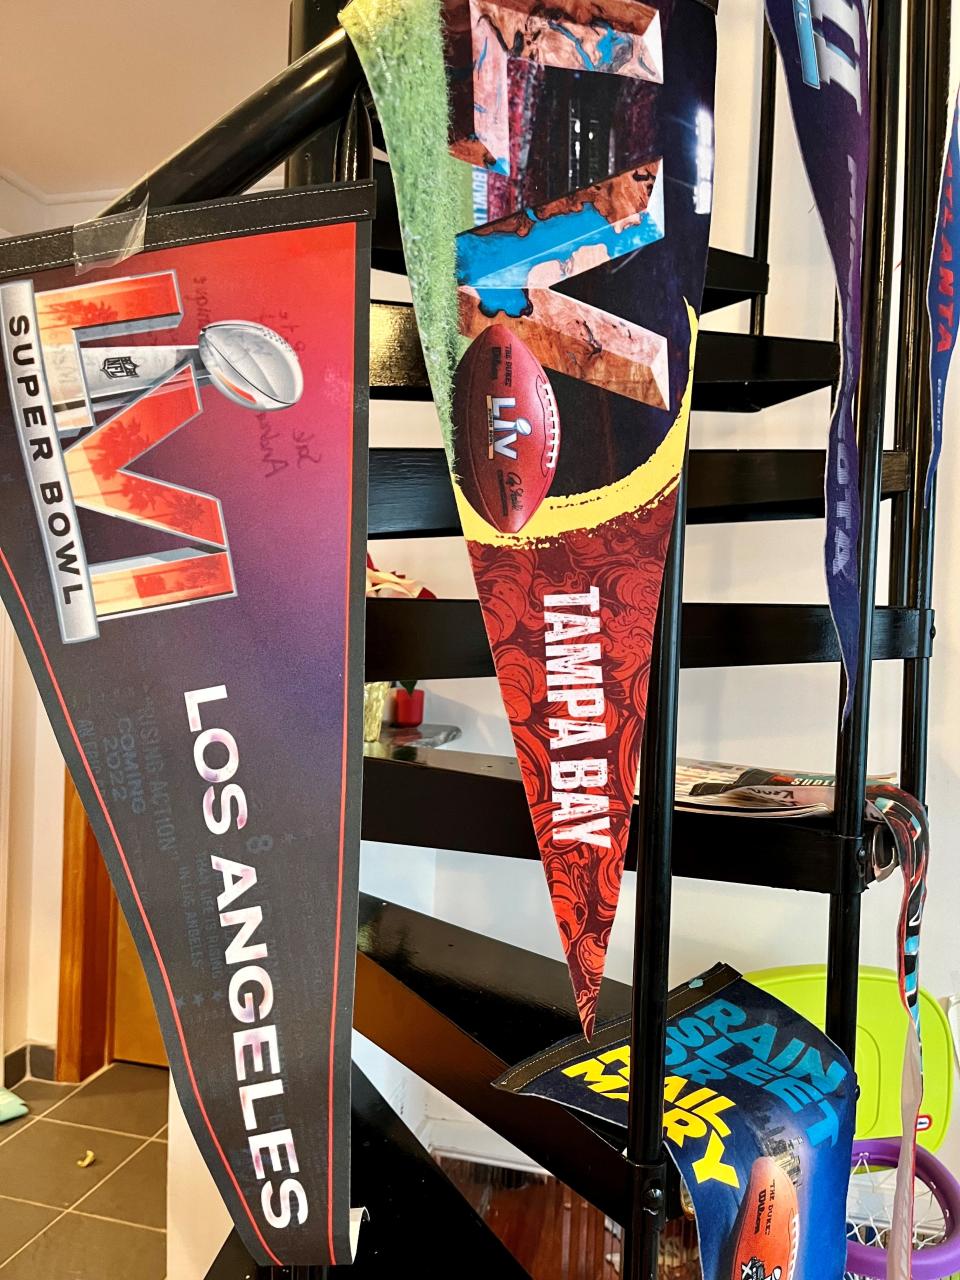 Every year, the Werkheiser family gets a pennant to represent their Super Bowl party.